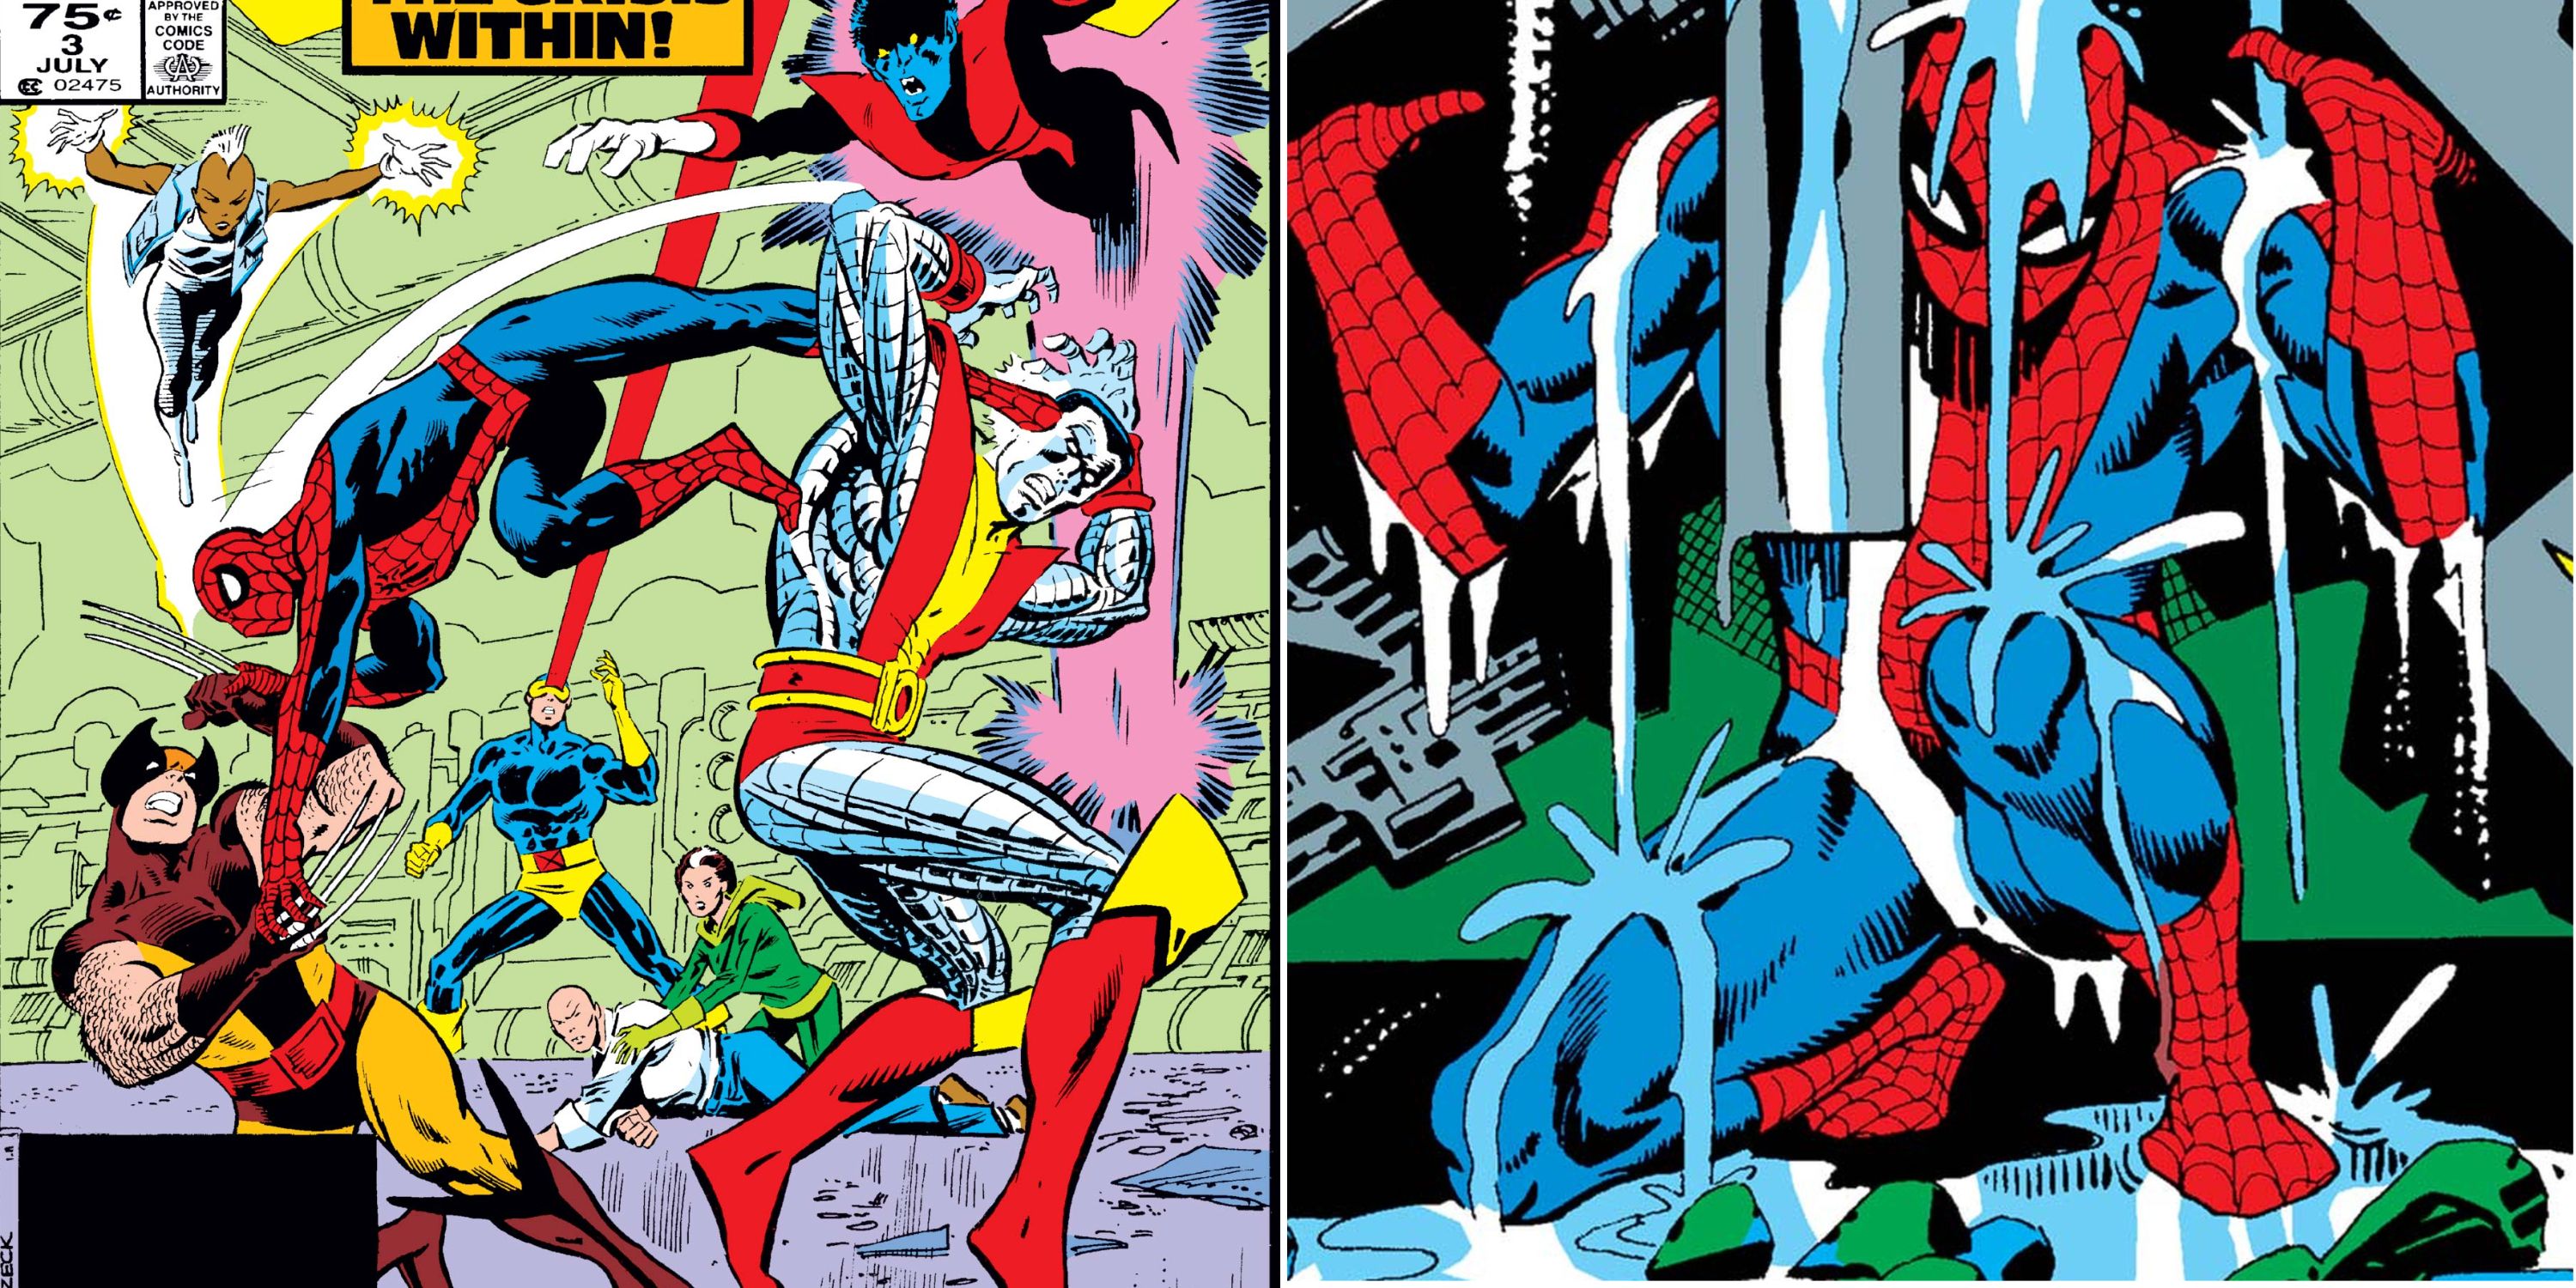 split image: Spider-Man battles the X-Men in Secret Wars and lifts a pile of rubble in If This Be My Destiny